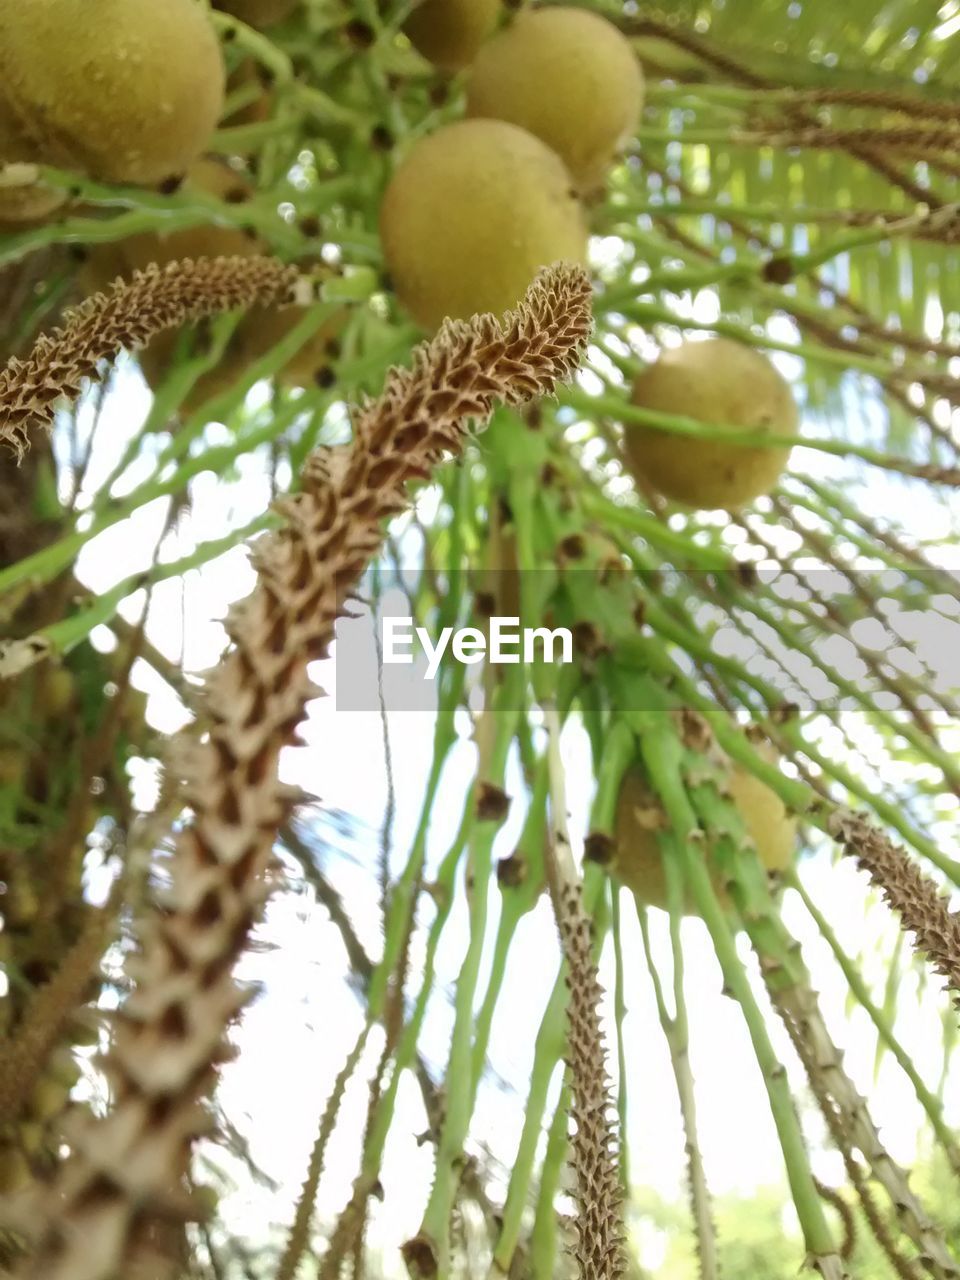 CLOSE-UP OF FRUITS ON TREE